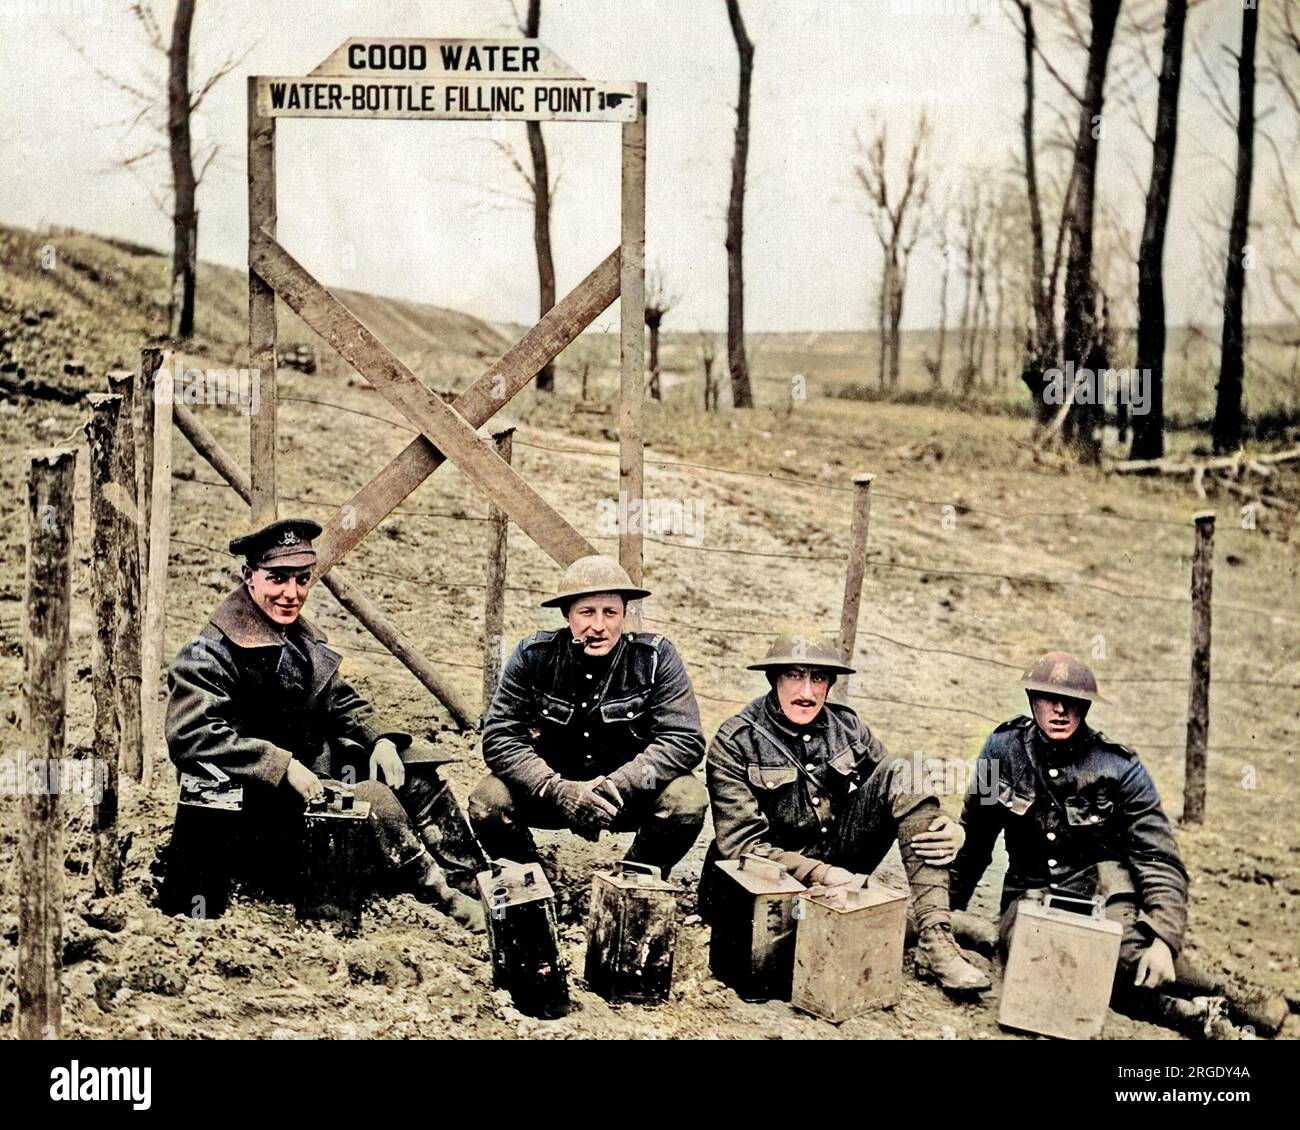 Four British soldiers with cans of water near a supply point on the Western Front during World War One. Stock Photo